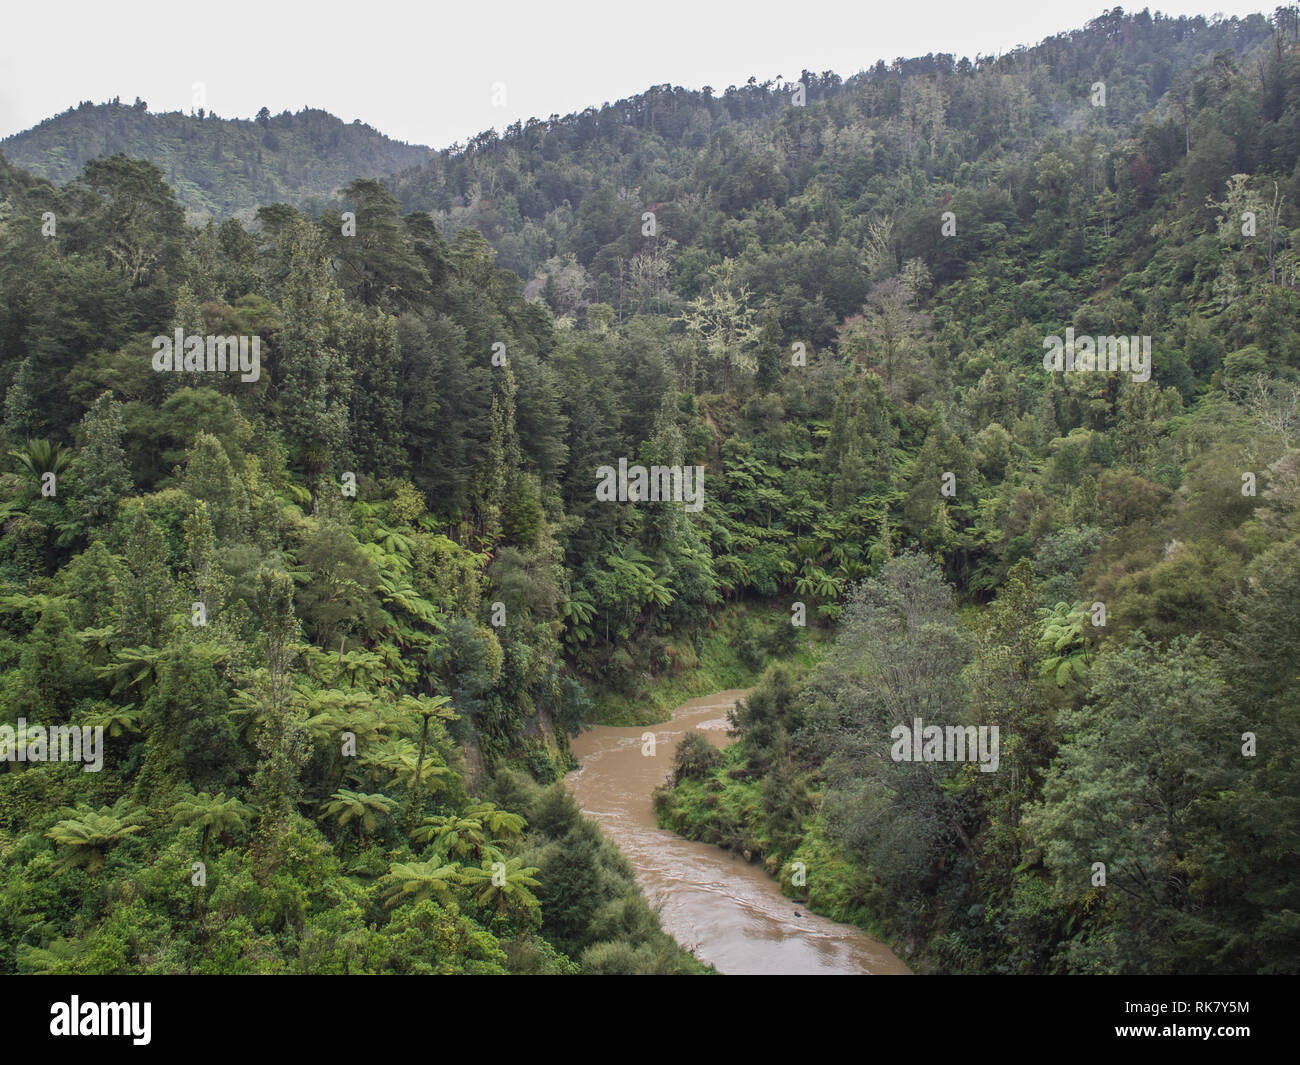 Ahuahu Stream in flood, flowing through native forest bush covered hills, an overcast day in autumn, Ahuahu Valley, Whanganui River, New Zealand Stock Photo